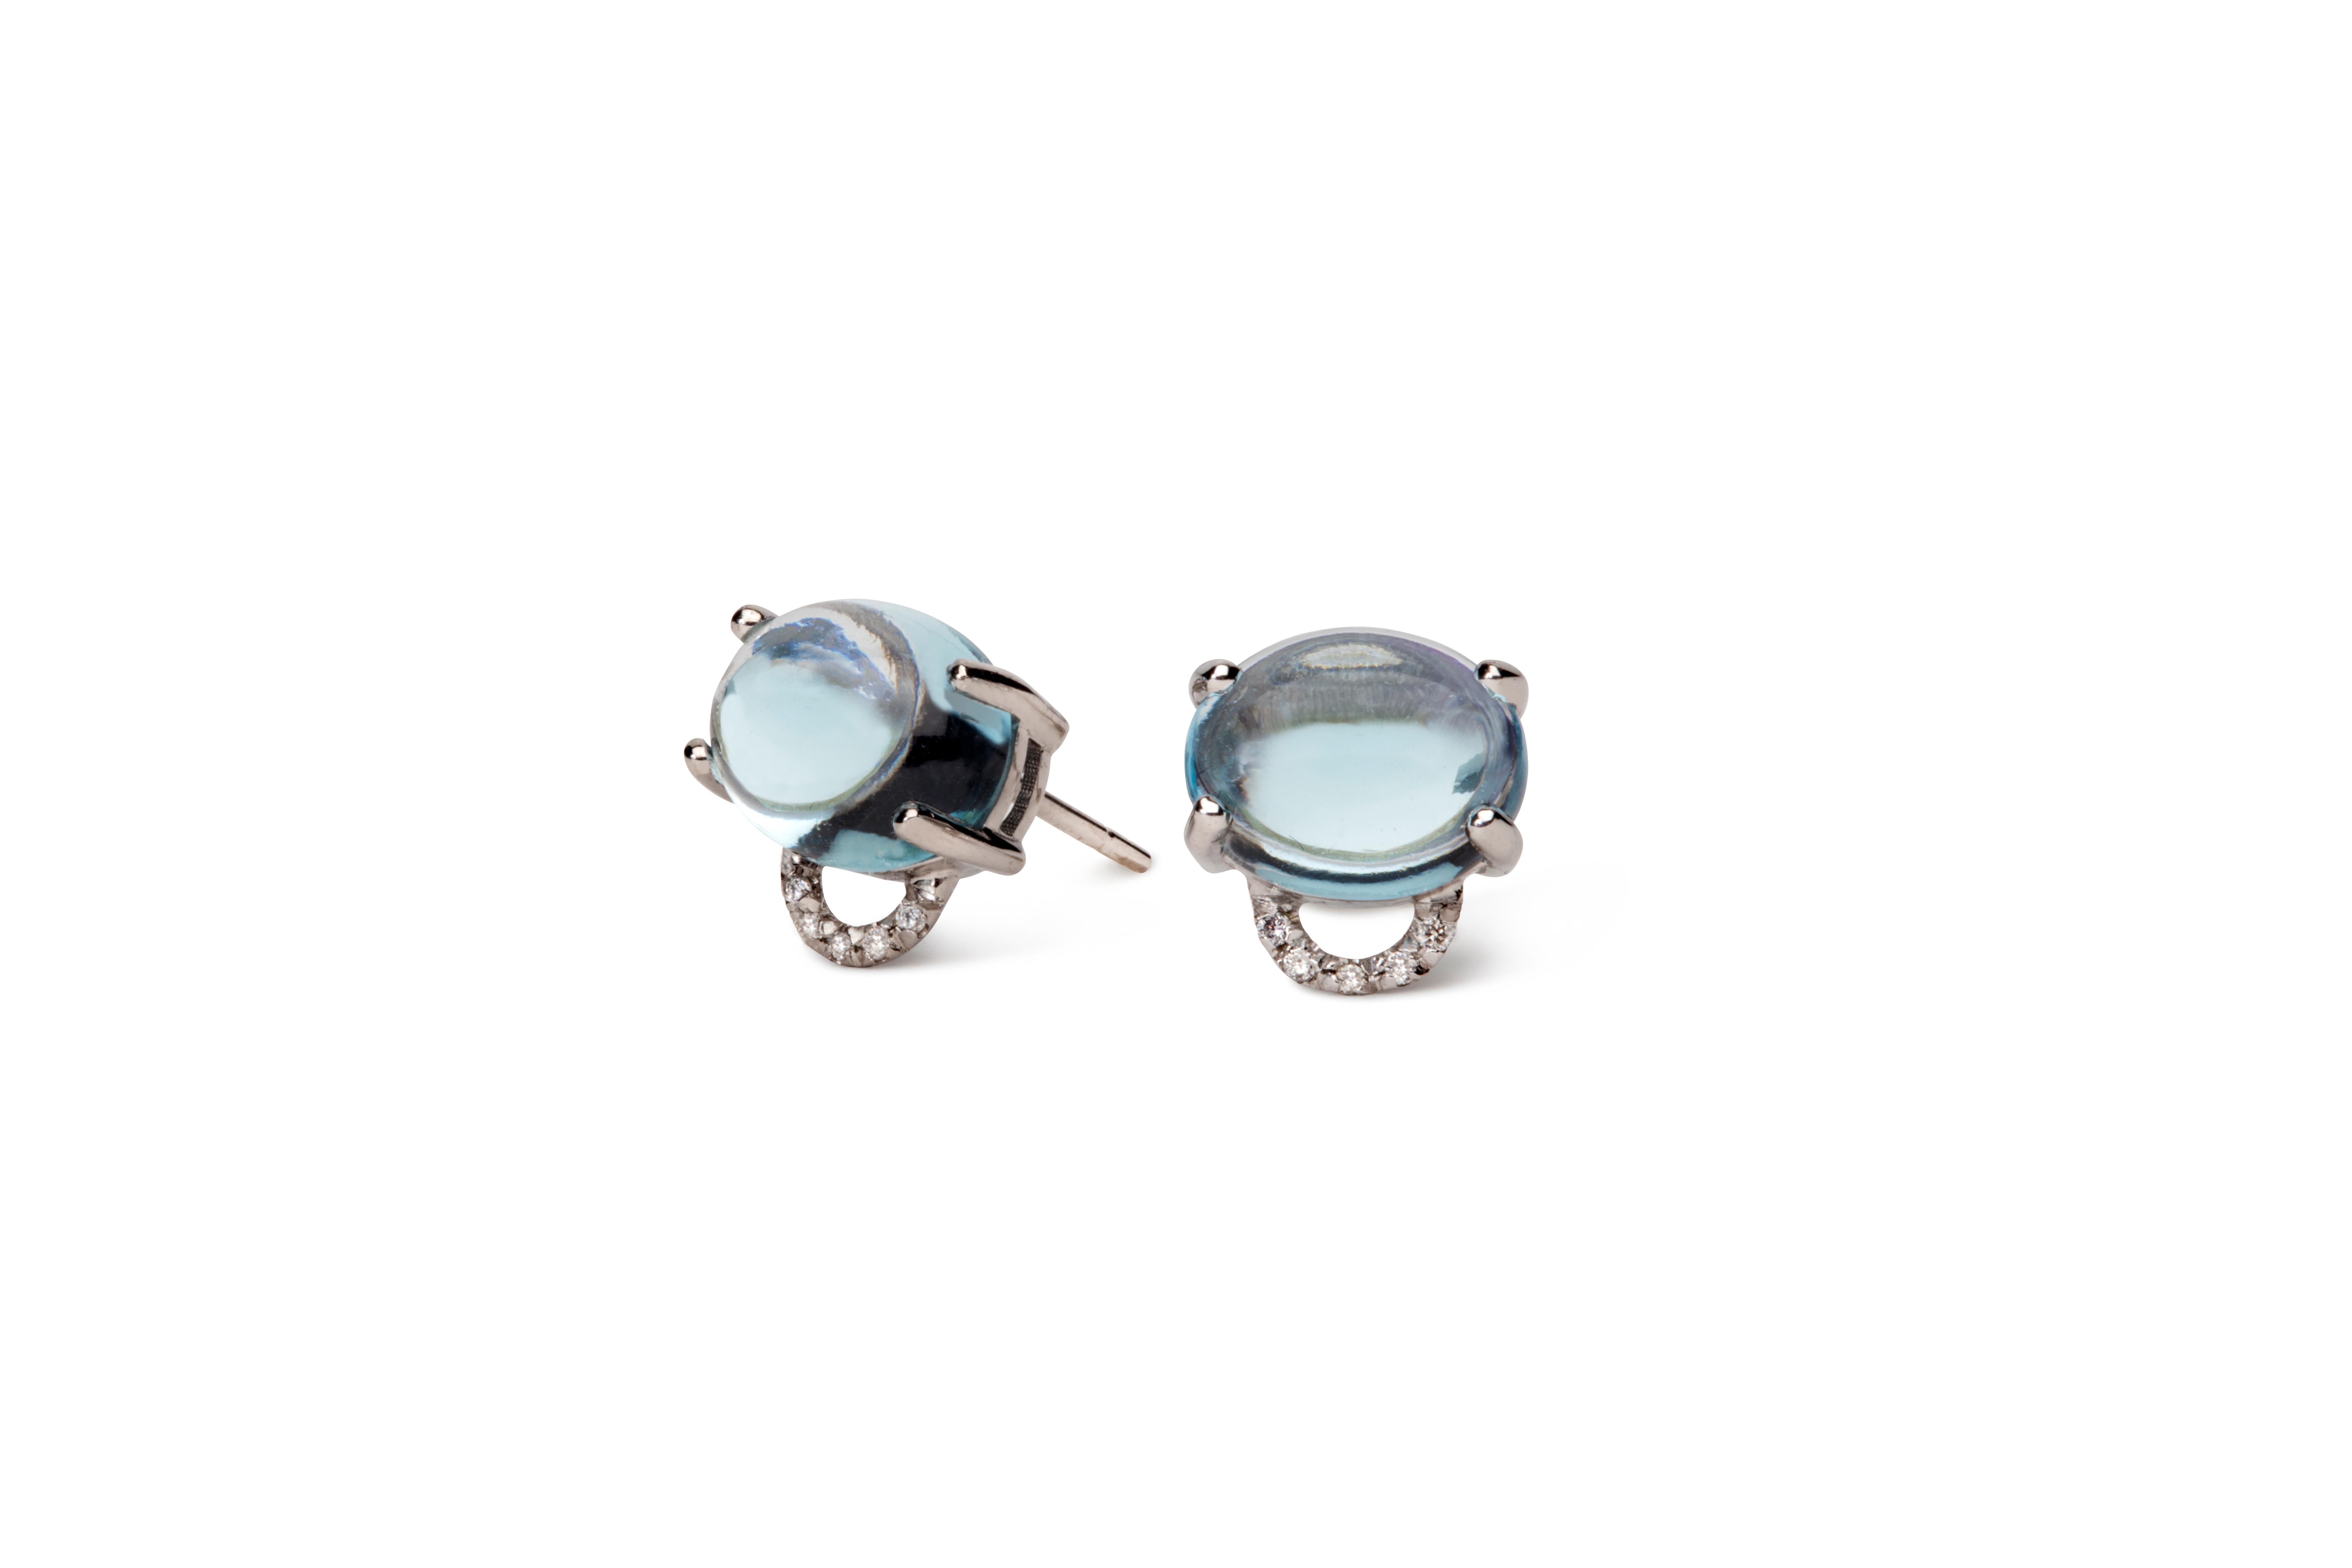 These petite luxurious diamond classic studs are great for everyday. Just put them on and get on with your day. These measure 10x10mm in total with a 2mm deep horsebit setting with pave diamonds and a beautiful cabochon natural gemstone that